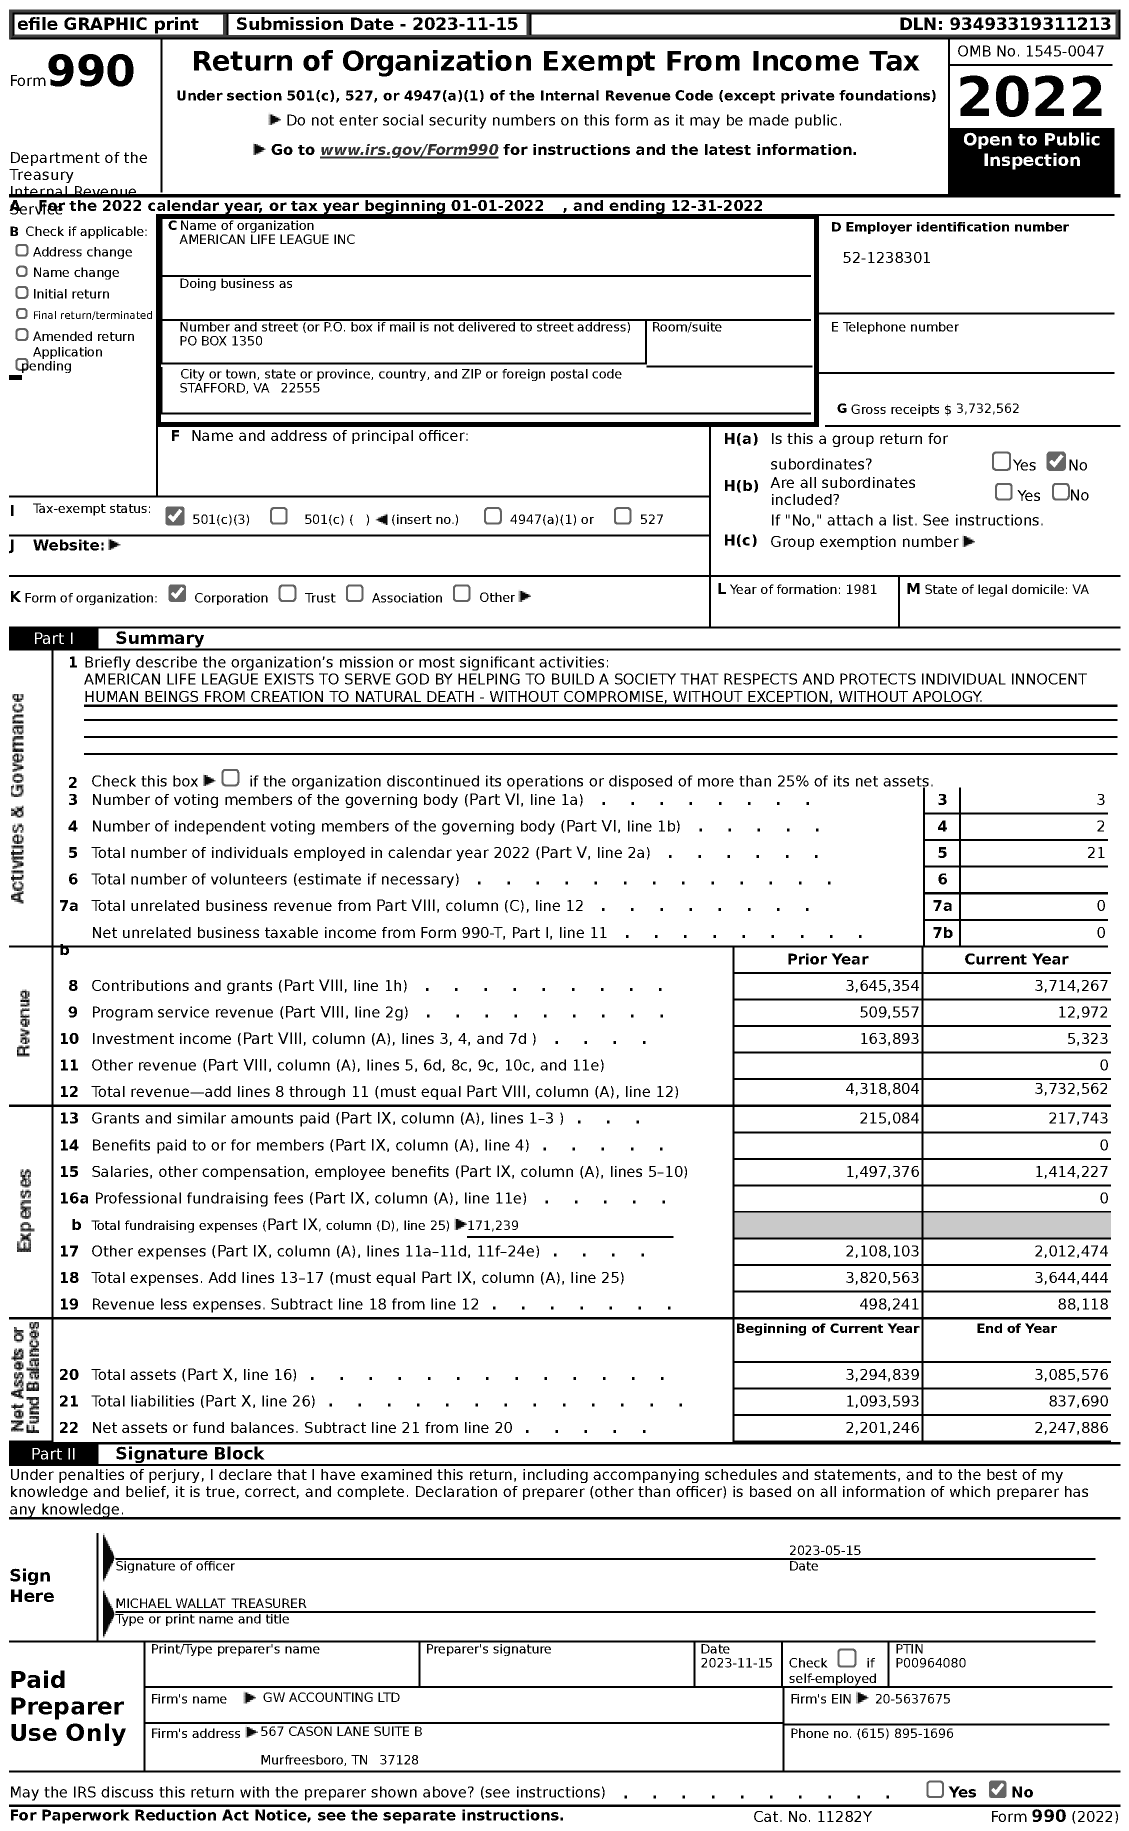 Image of first page of 2022 Form 990 for American Life League (ALL)